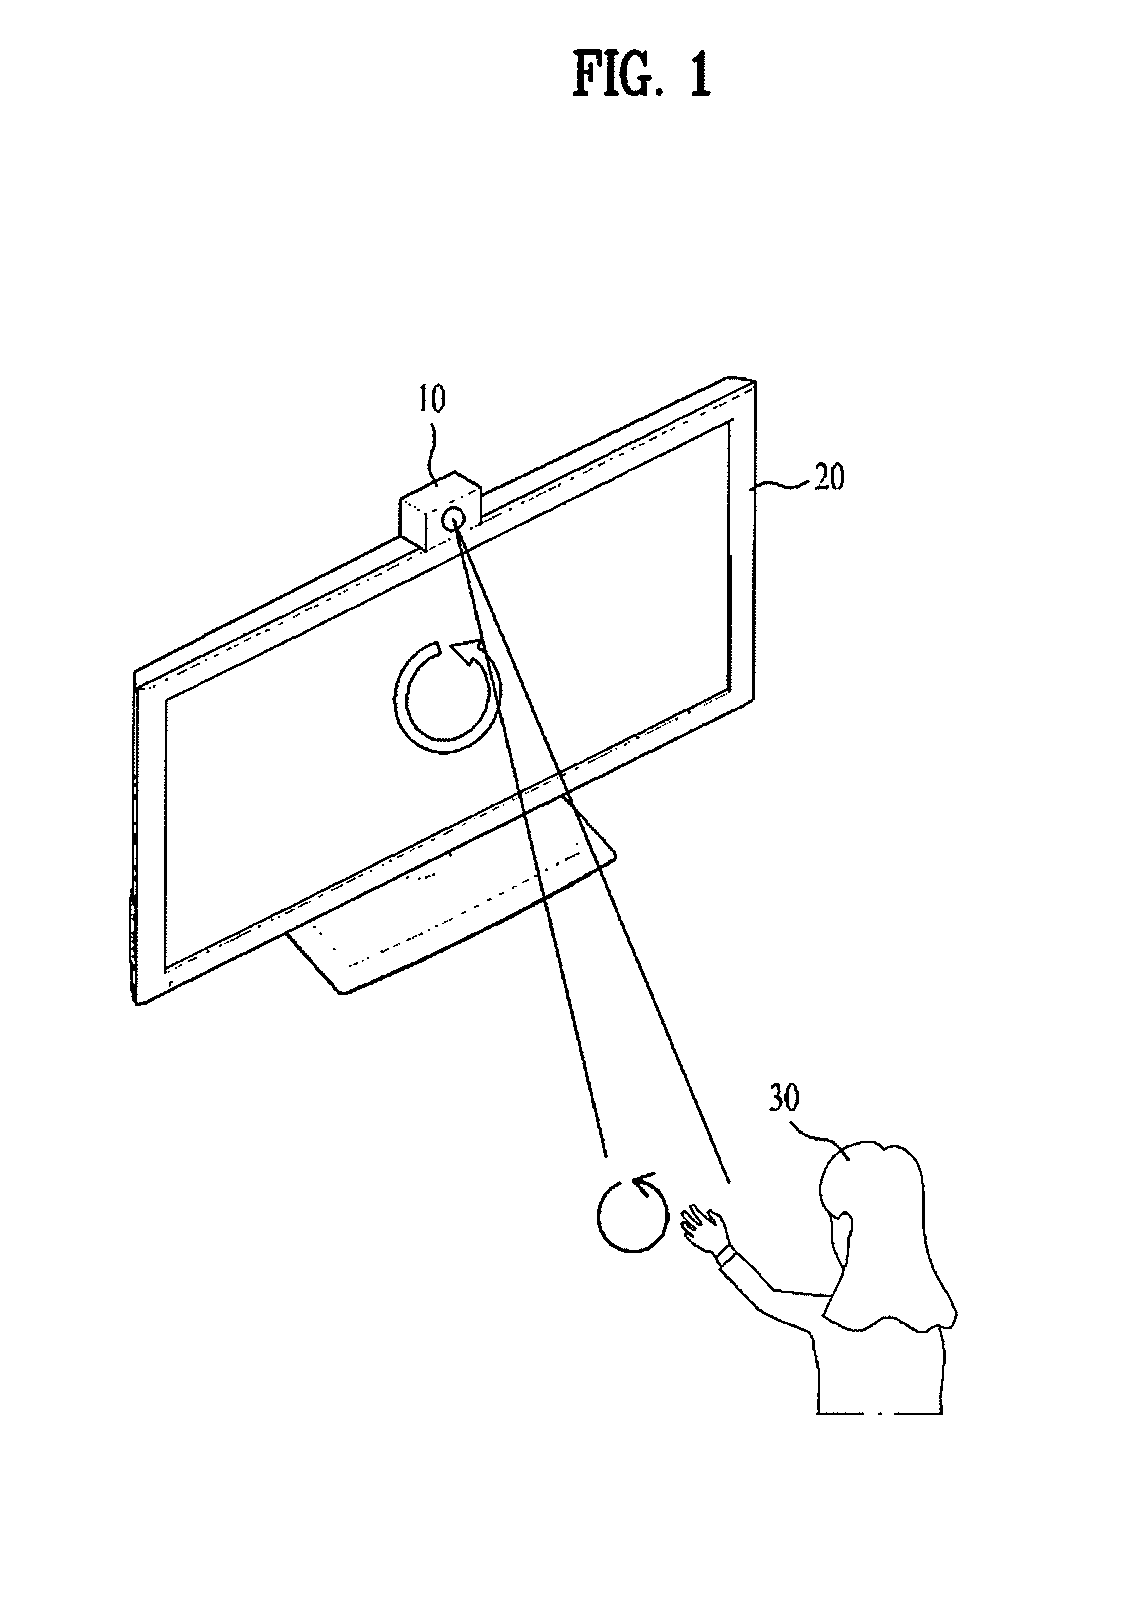 Gesture-based user interface method and apparatus